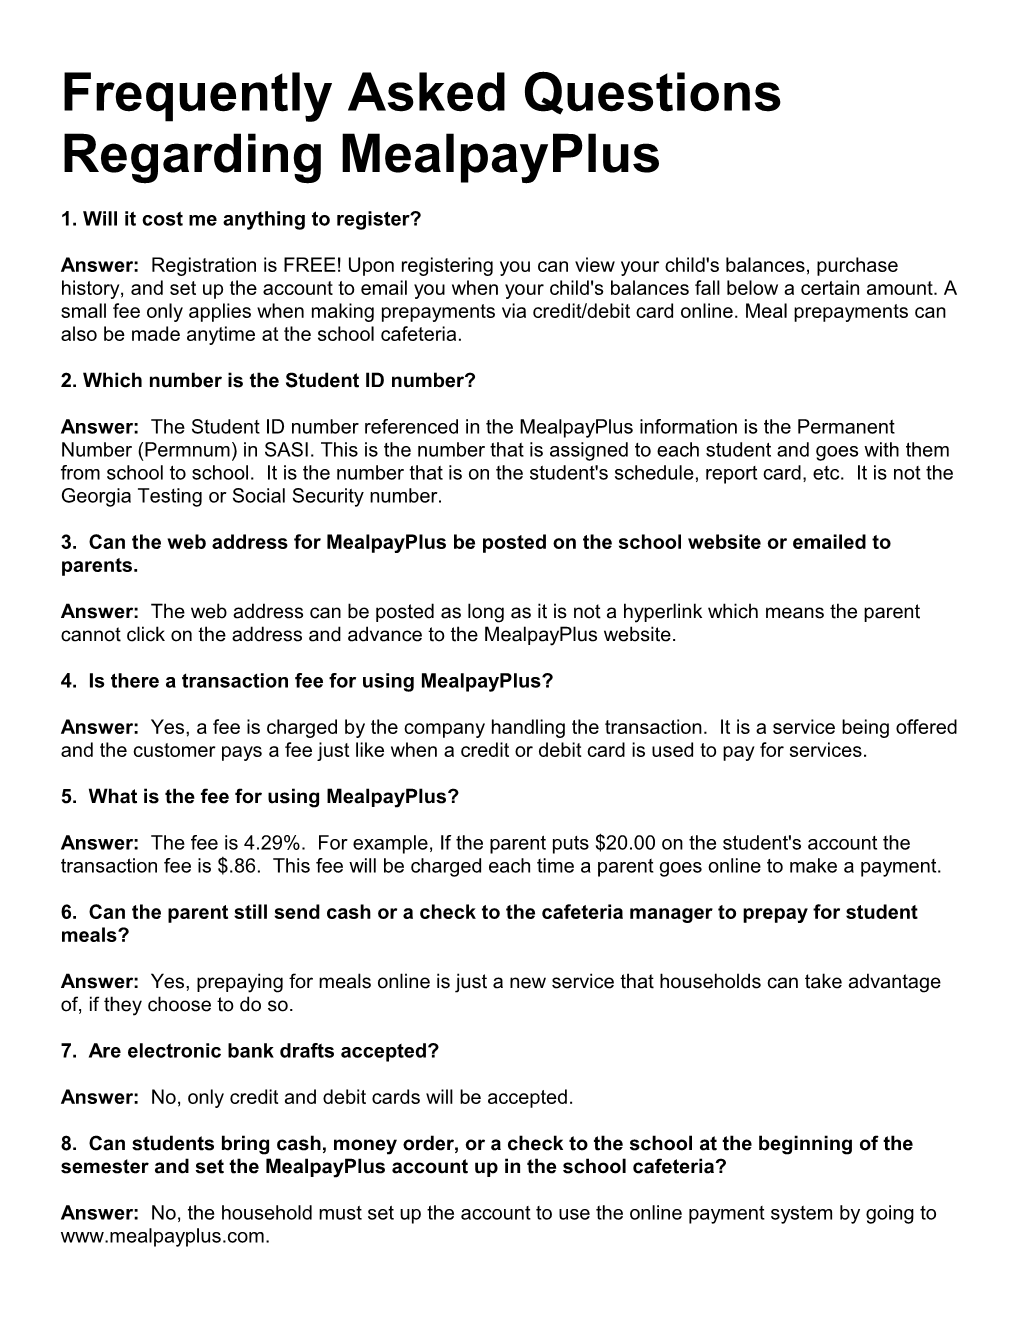 Frequently Asked Questions Regarding Mealpayplus